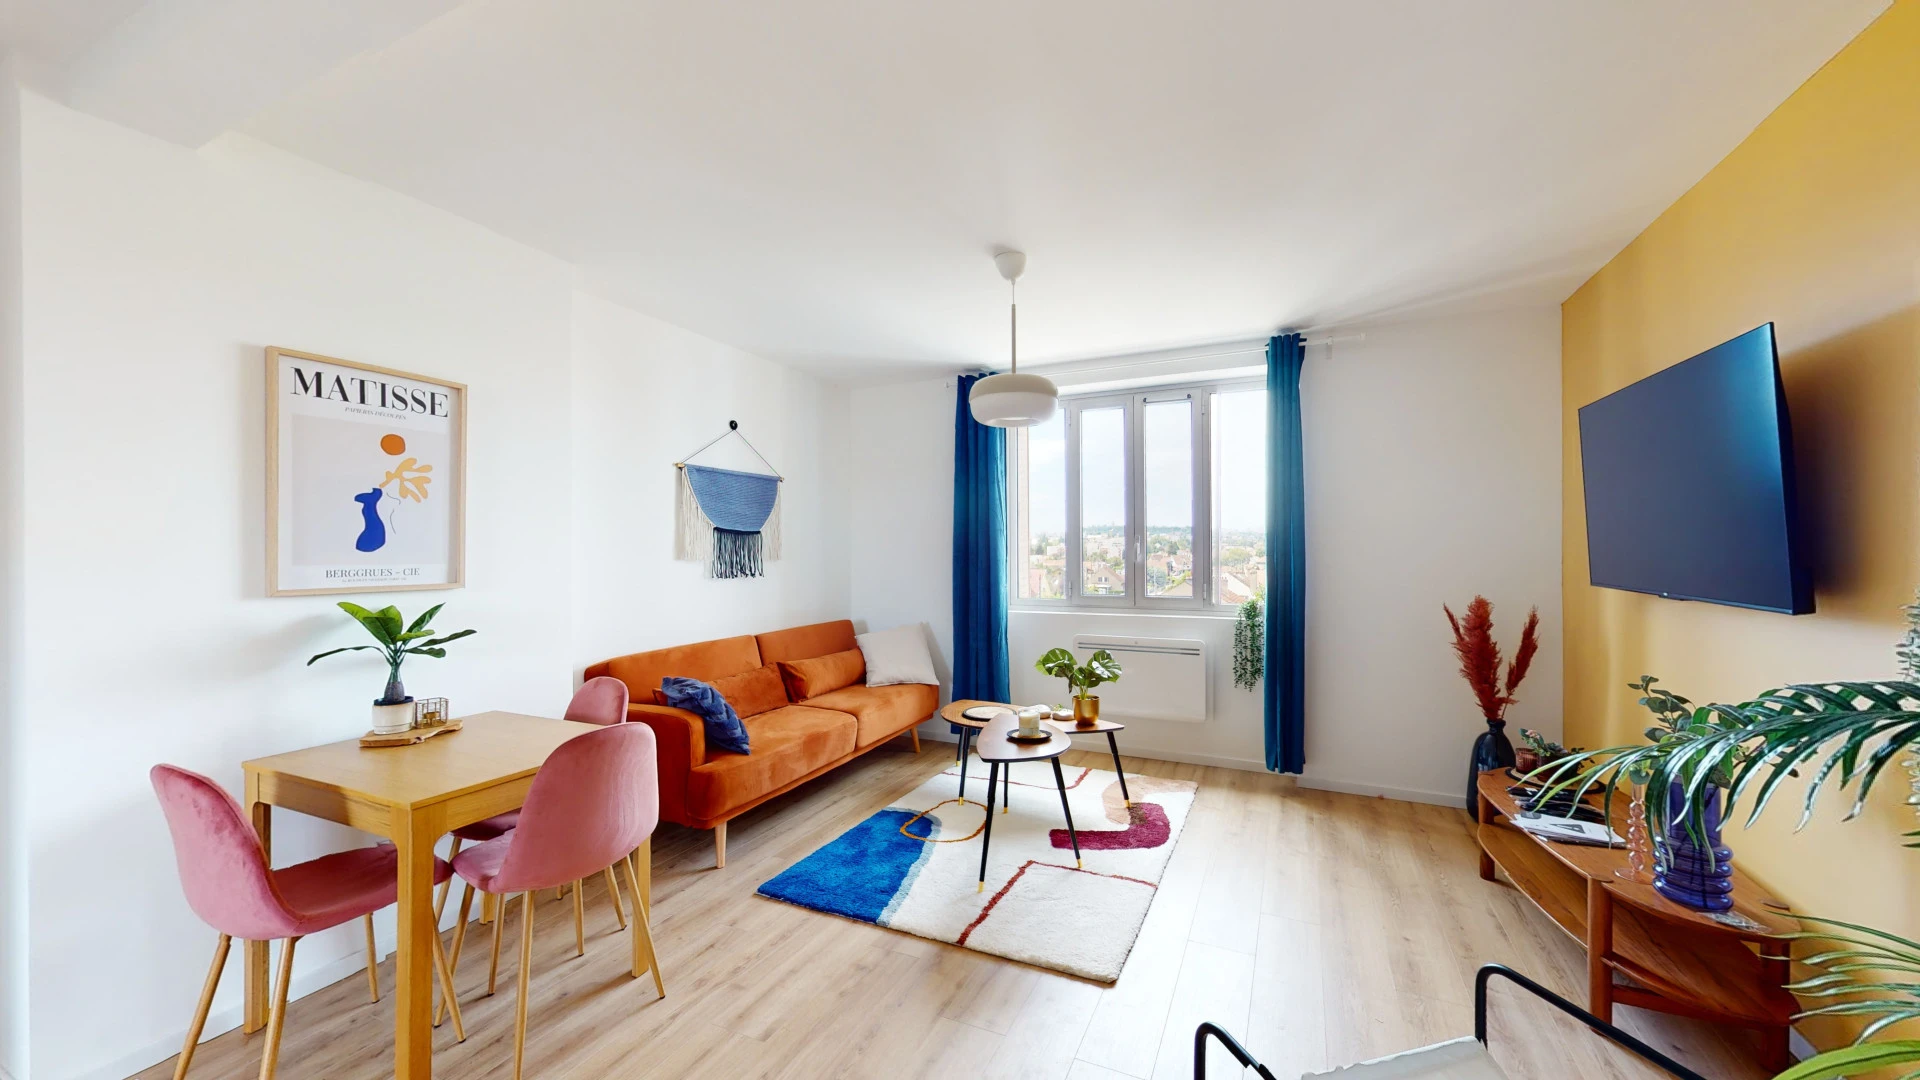 Renting rooms by the month in Dijon